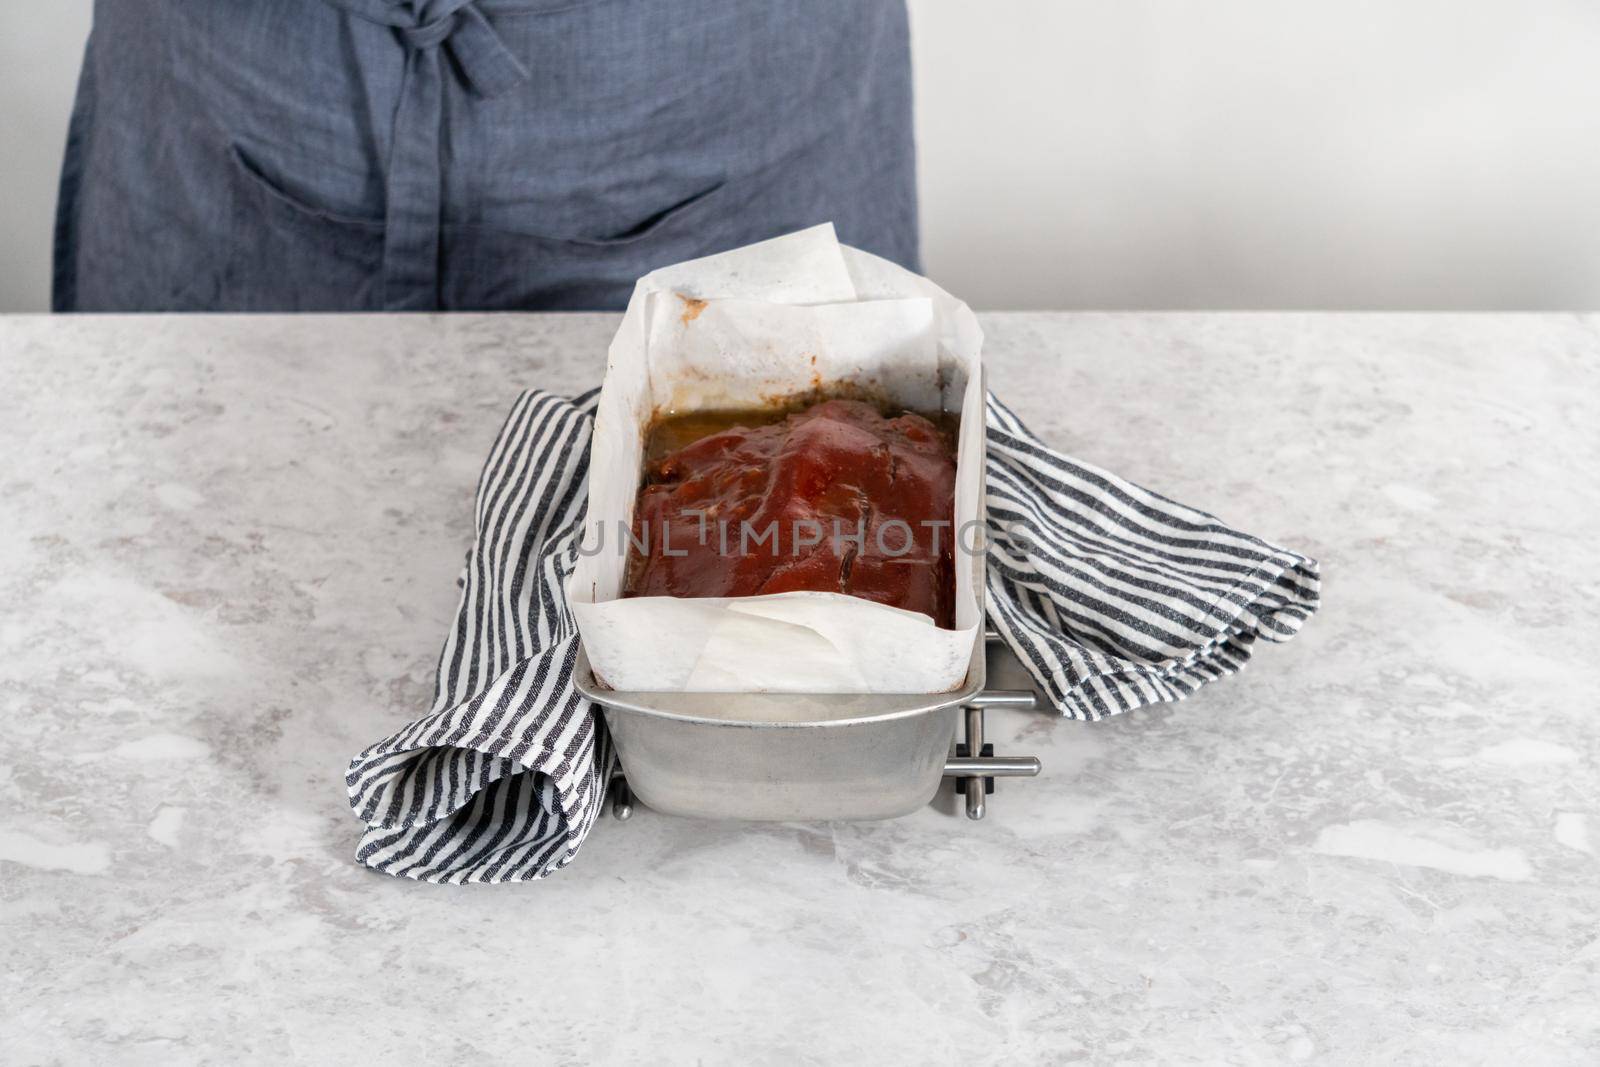 Cooling classic meatloaf glazed with sweet glaze in a loaf pan lined with parchment paper.